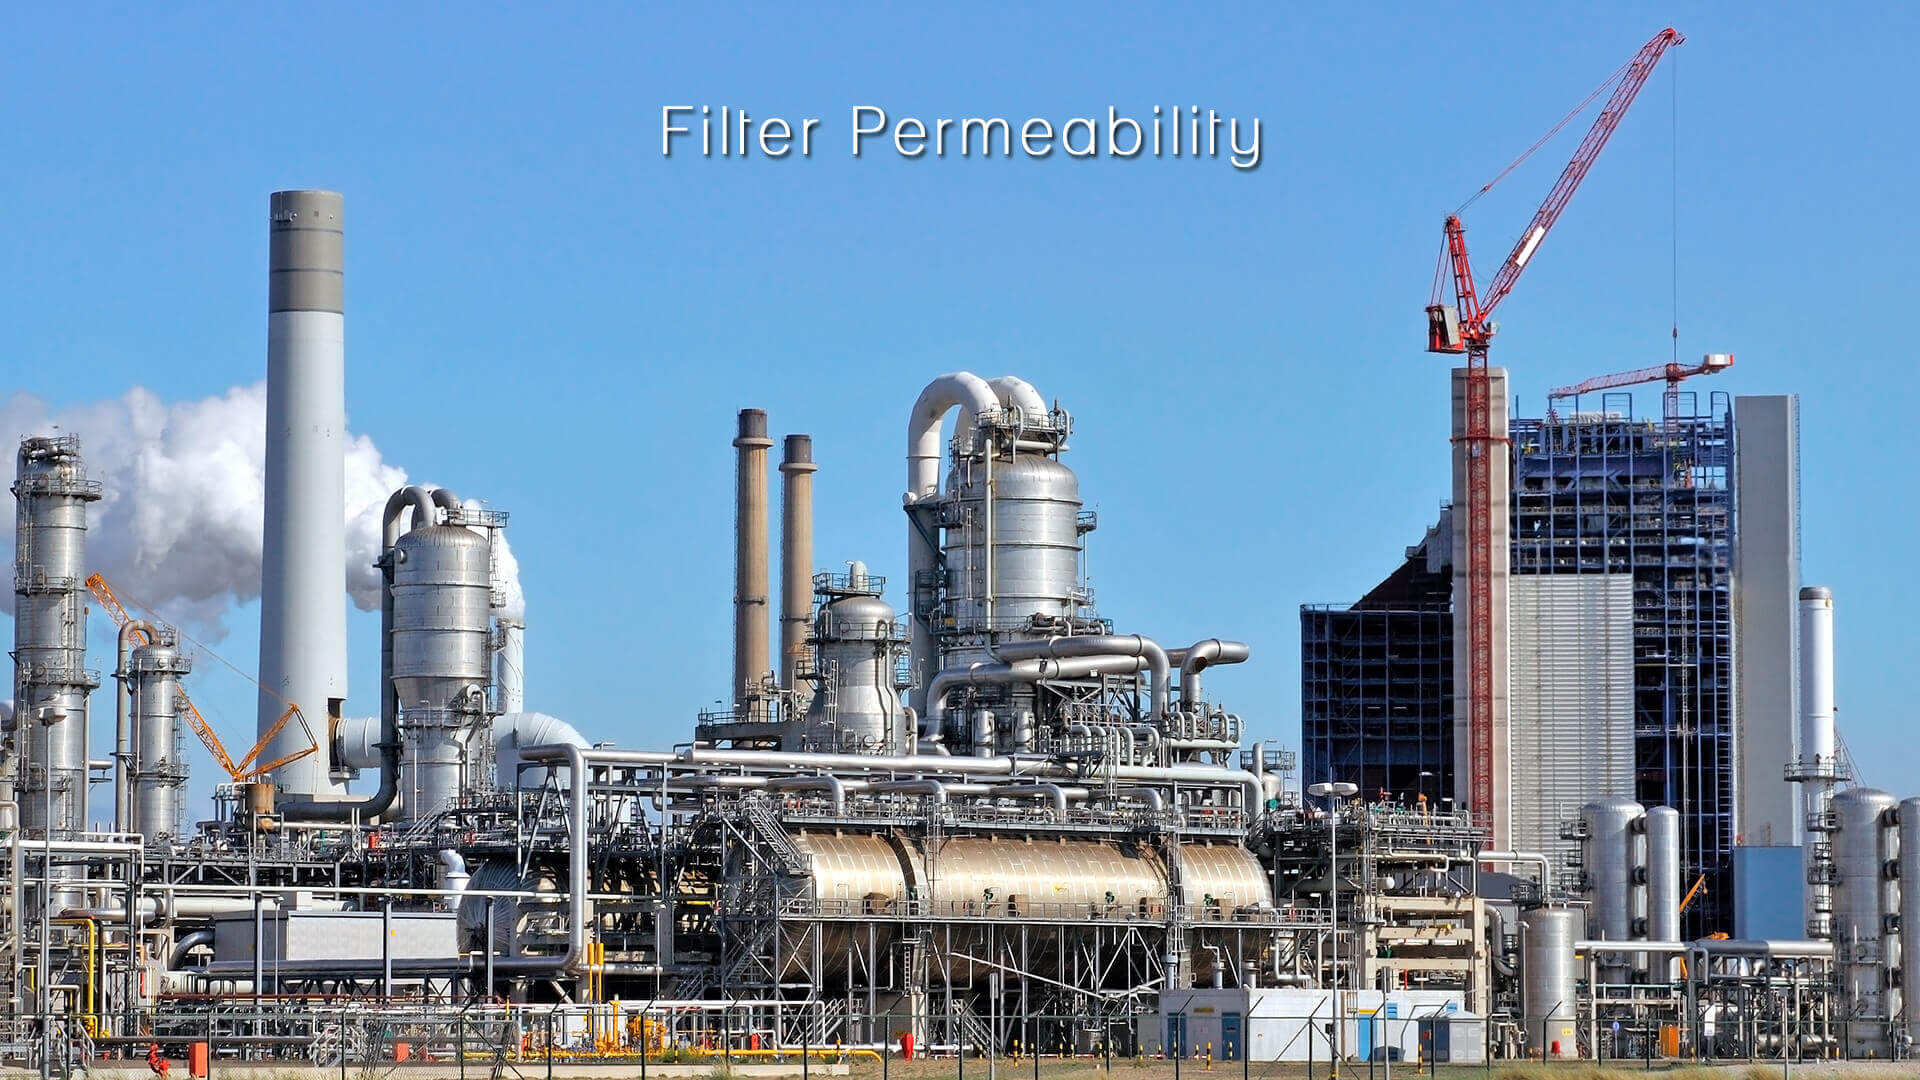 Filter Permeability